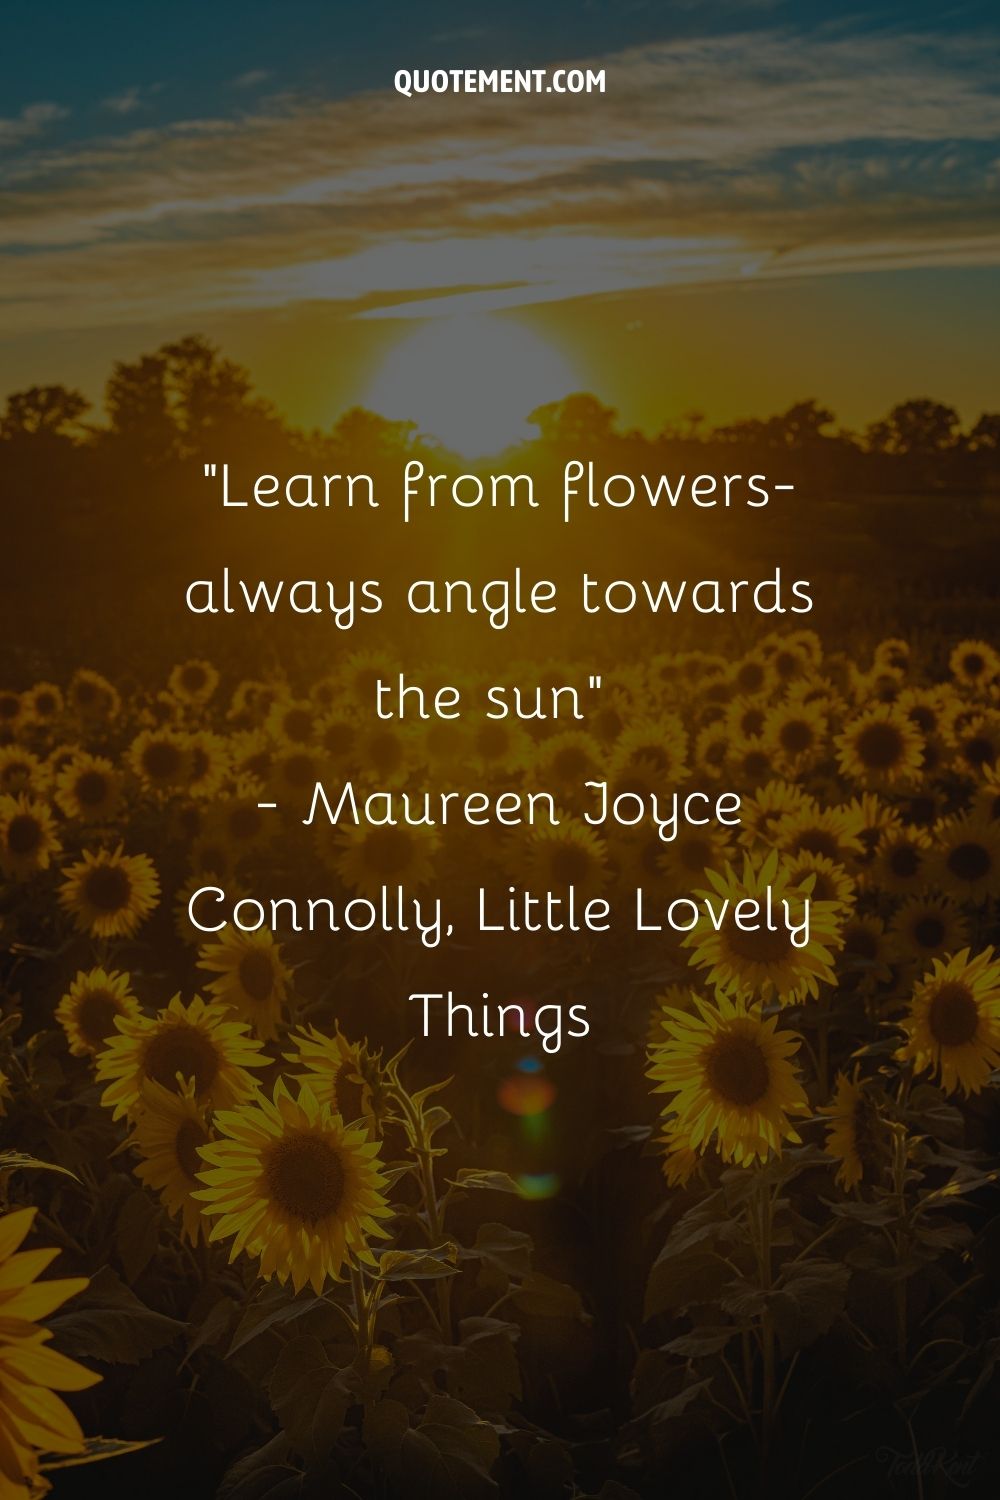 Learn from flowers-always angle towards the sun